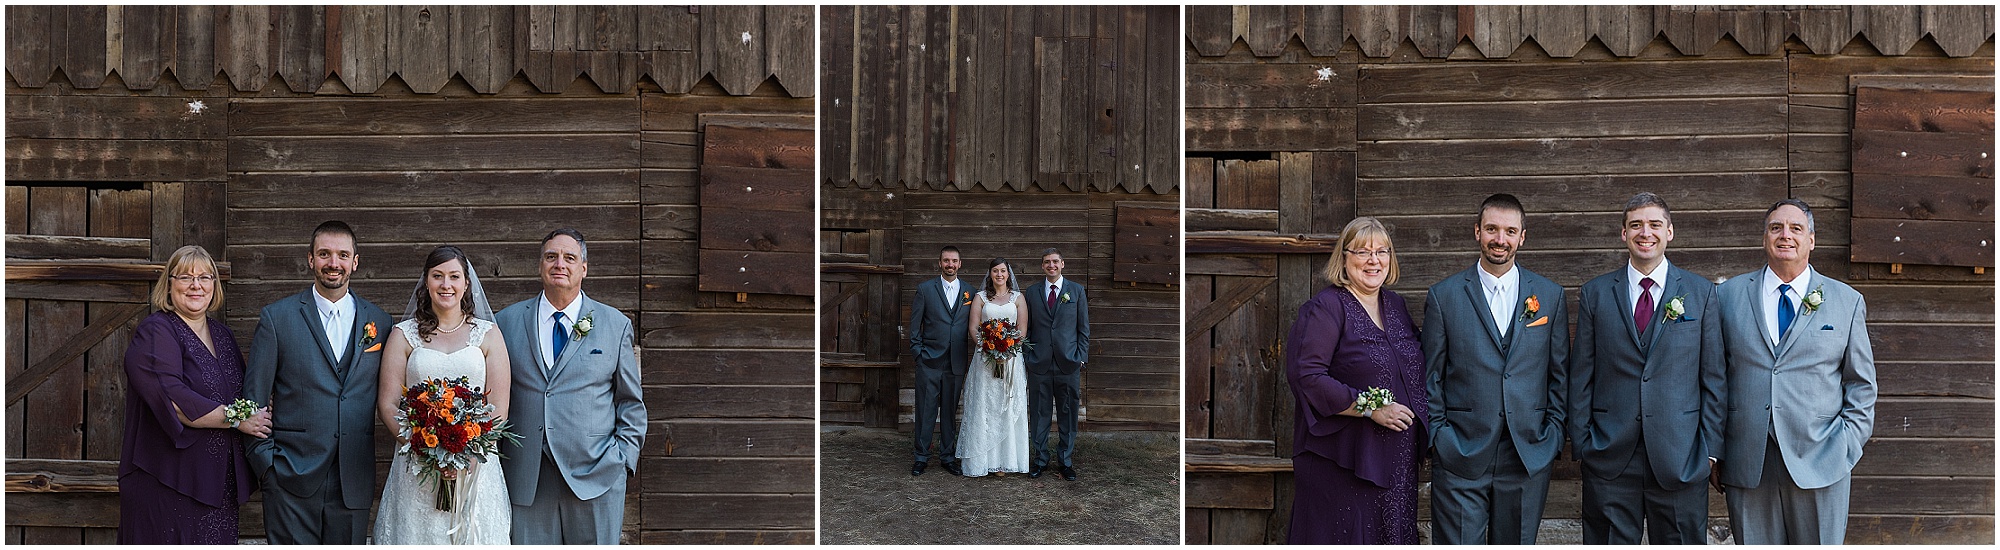 Family formals at a Hollinshead Barn fall wedding in Bend, OR. | Erica Swantek Photography